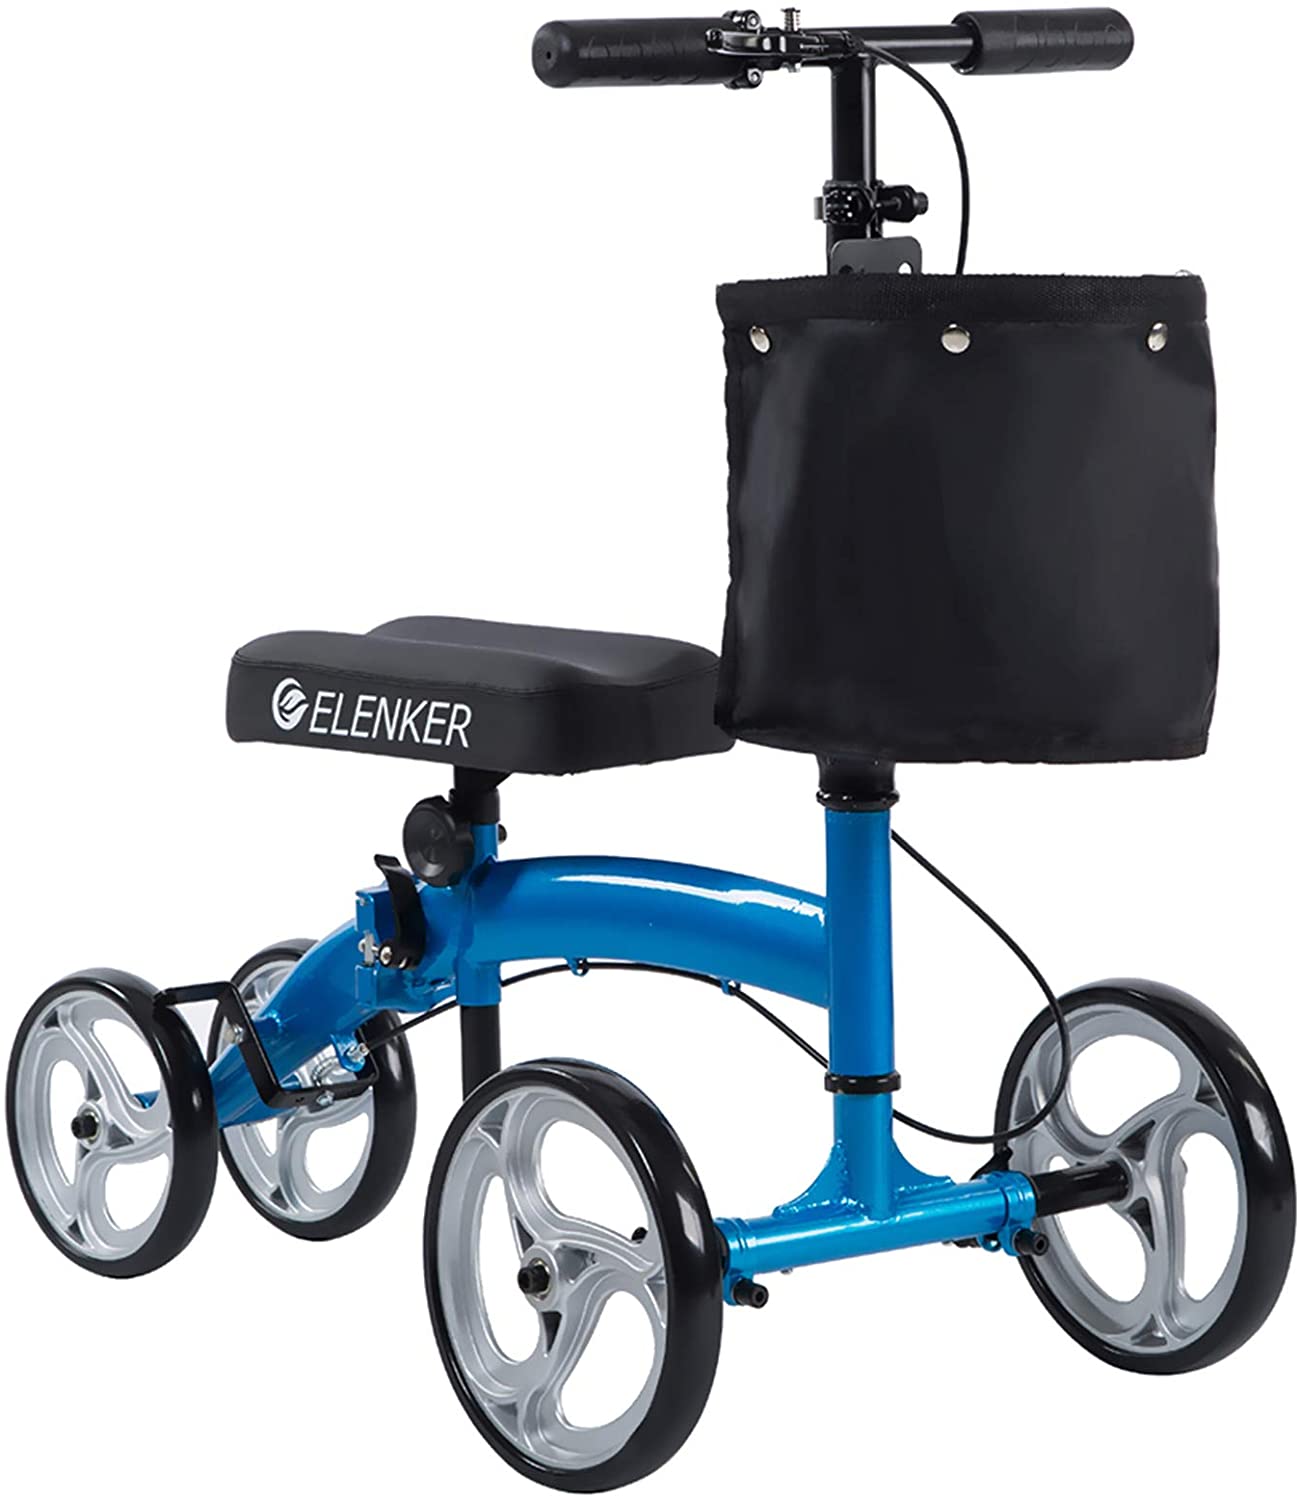 KGH-9155 ELENKER?  Lightweight Foldable Knee Scooter Crutches Alternative for Foot Injuries Ankles Surgery